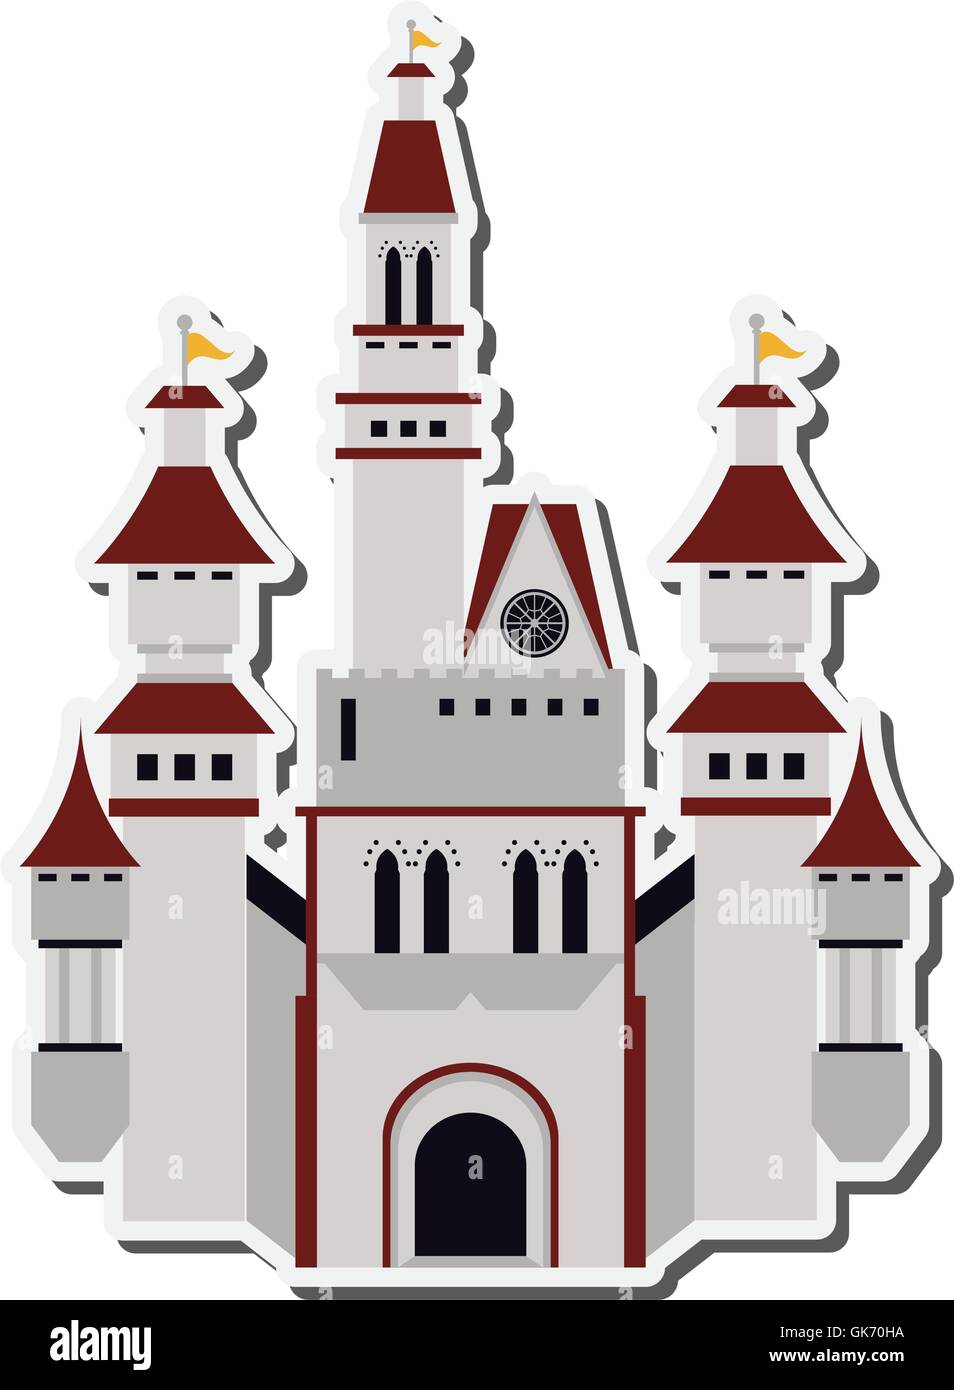 large castle icon Stock Vector